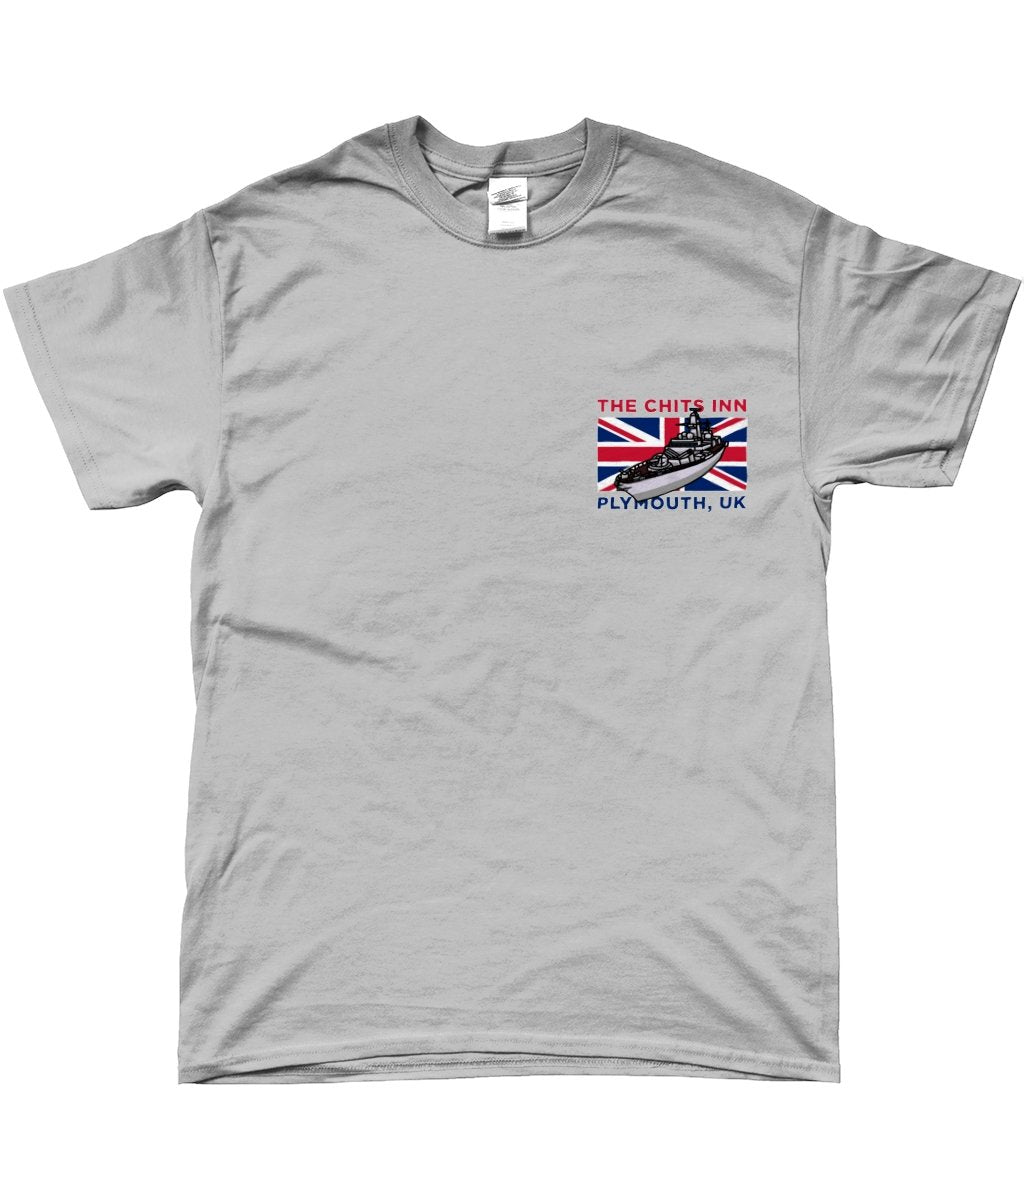 Type 23 Appreciation Tee - The Chits Inn